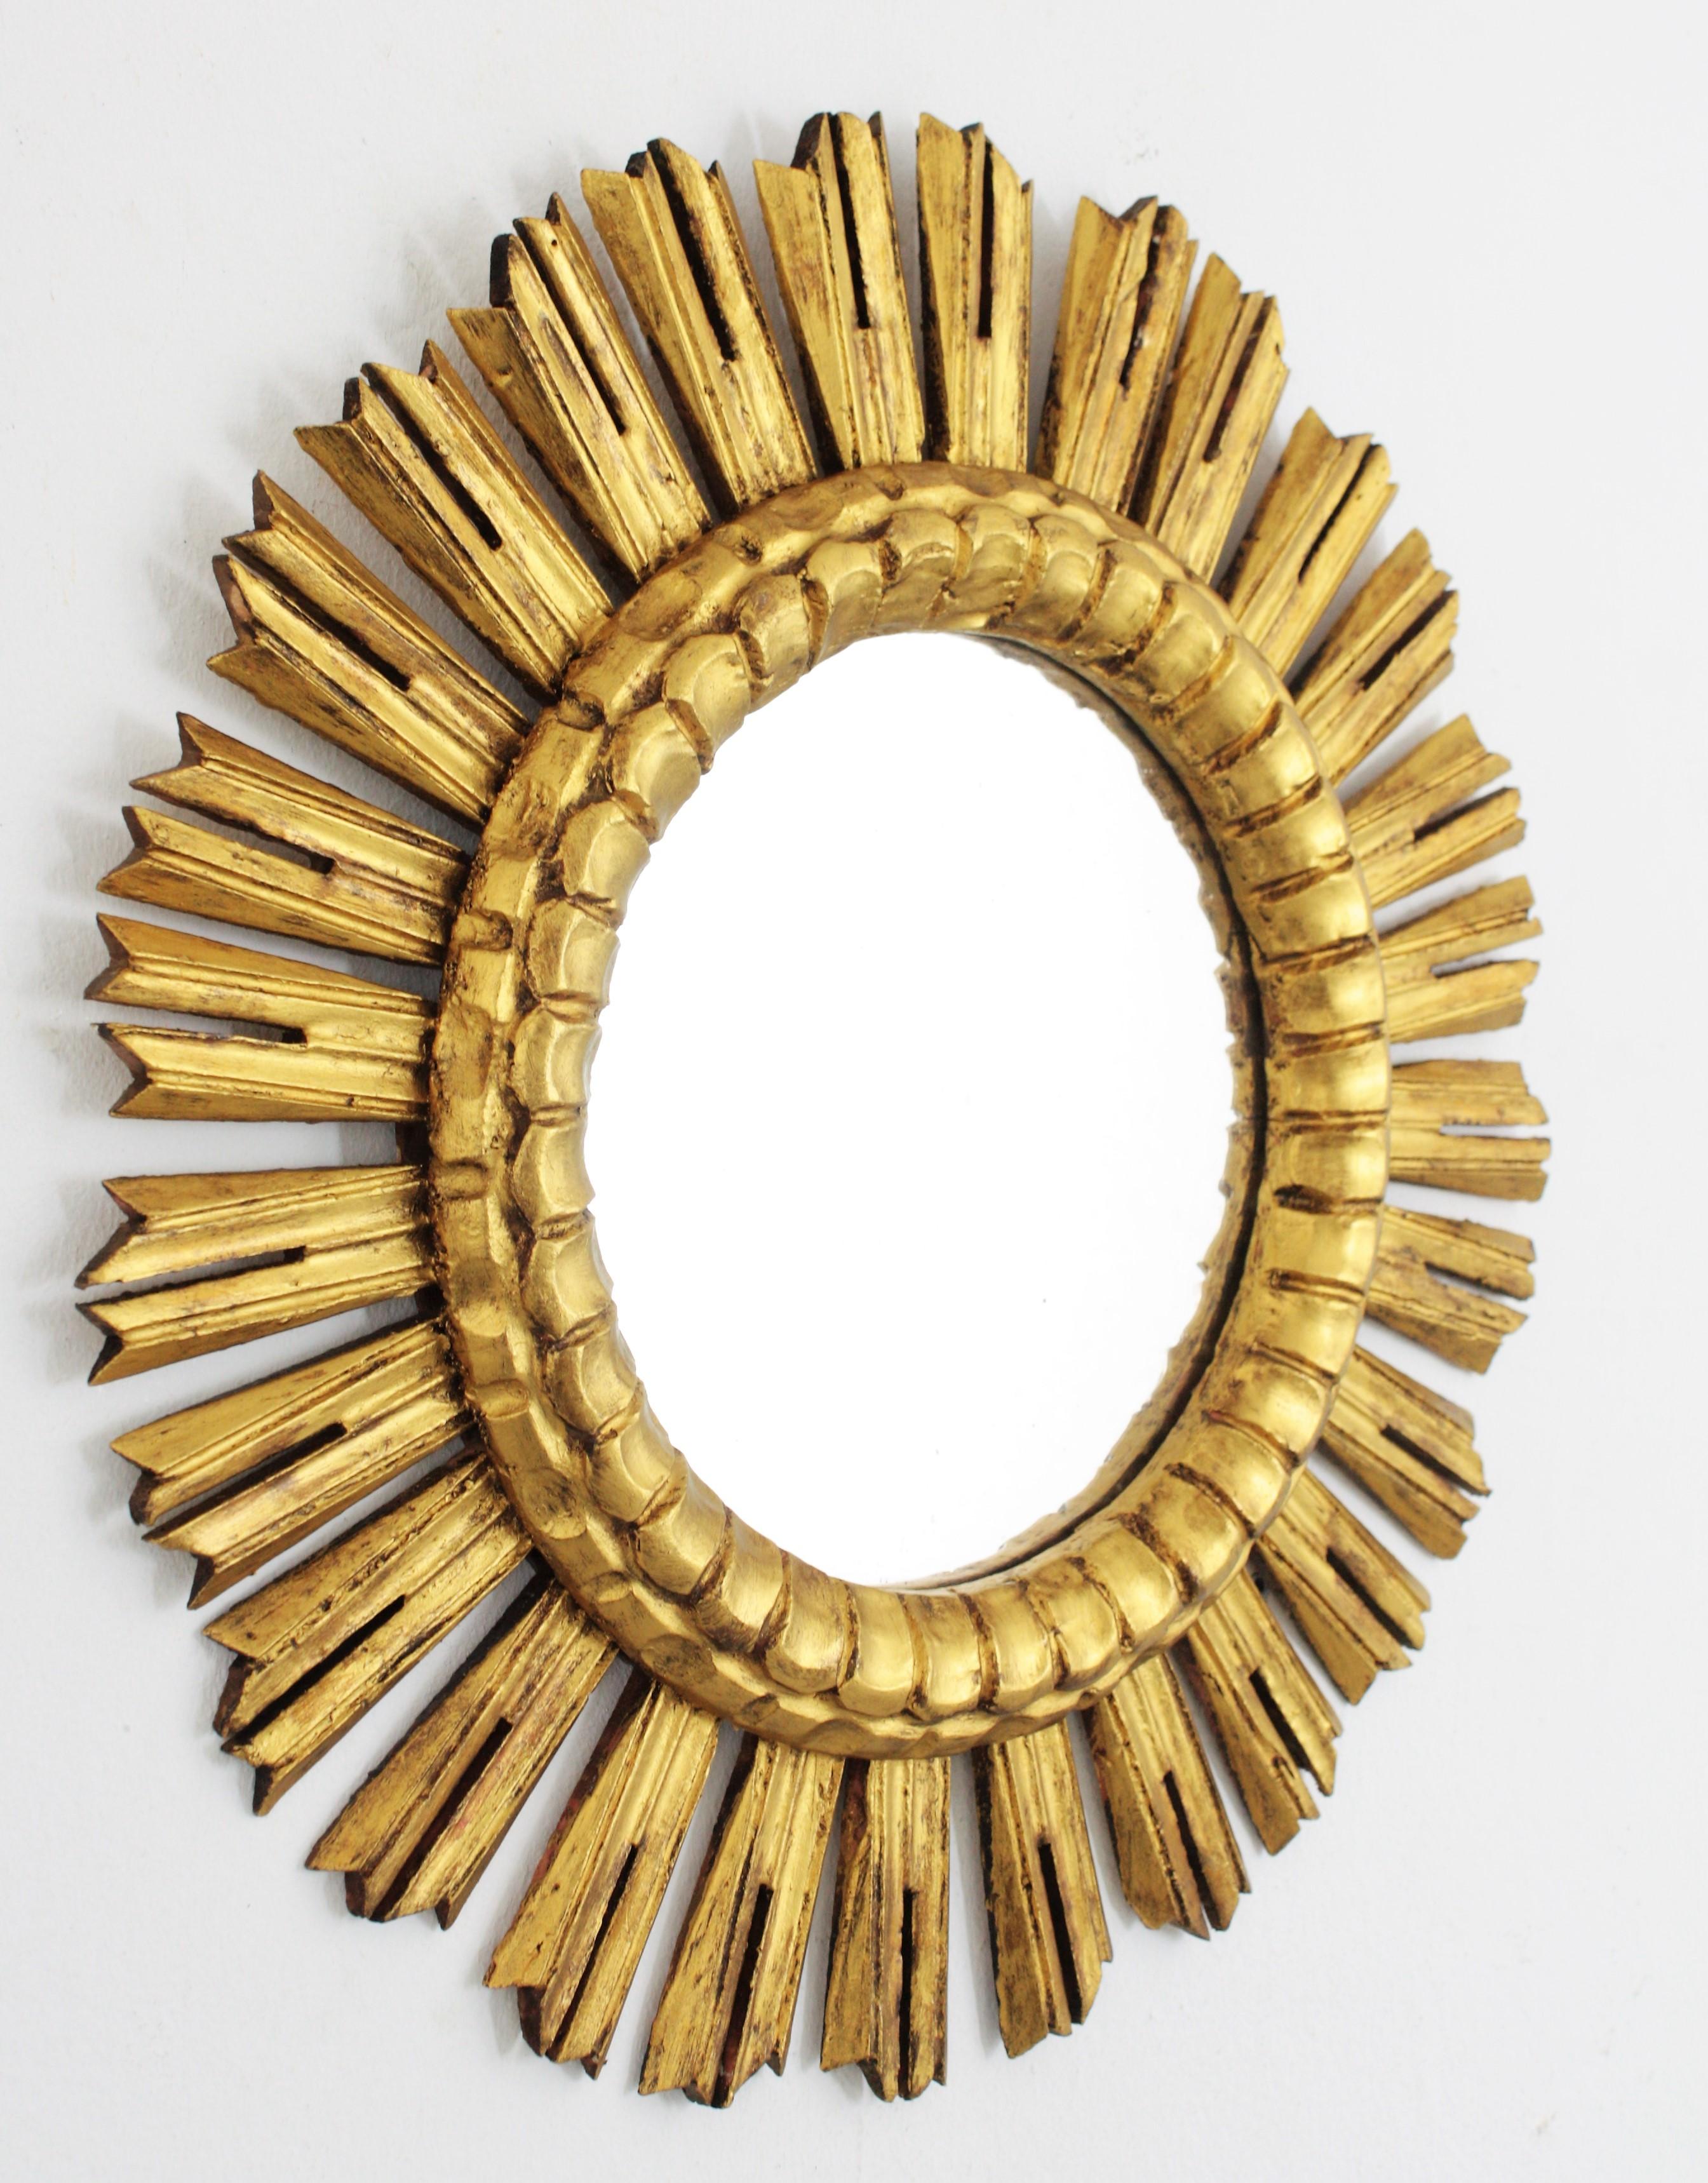 French 1930s medium sized carved giltwood sunburst mirror in Baroque style.
Amazing French giltwood sunburst mirror with gold leaf finish. Finely carved piece and charming patina.
Original glass mirror,
Measures: Overall diameter 50 cm,